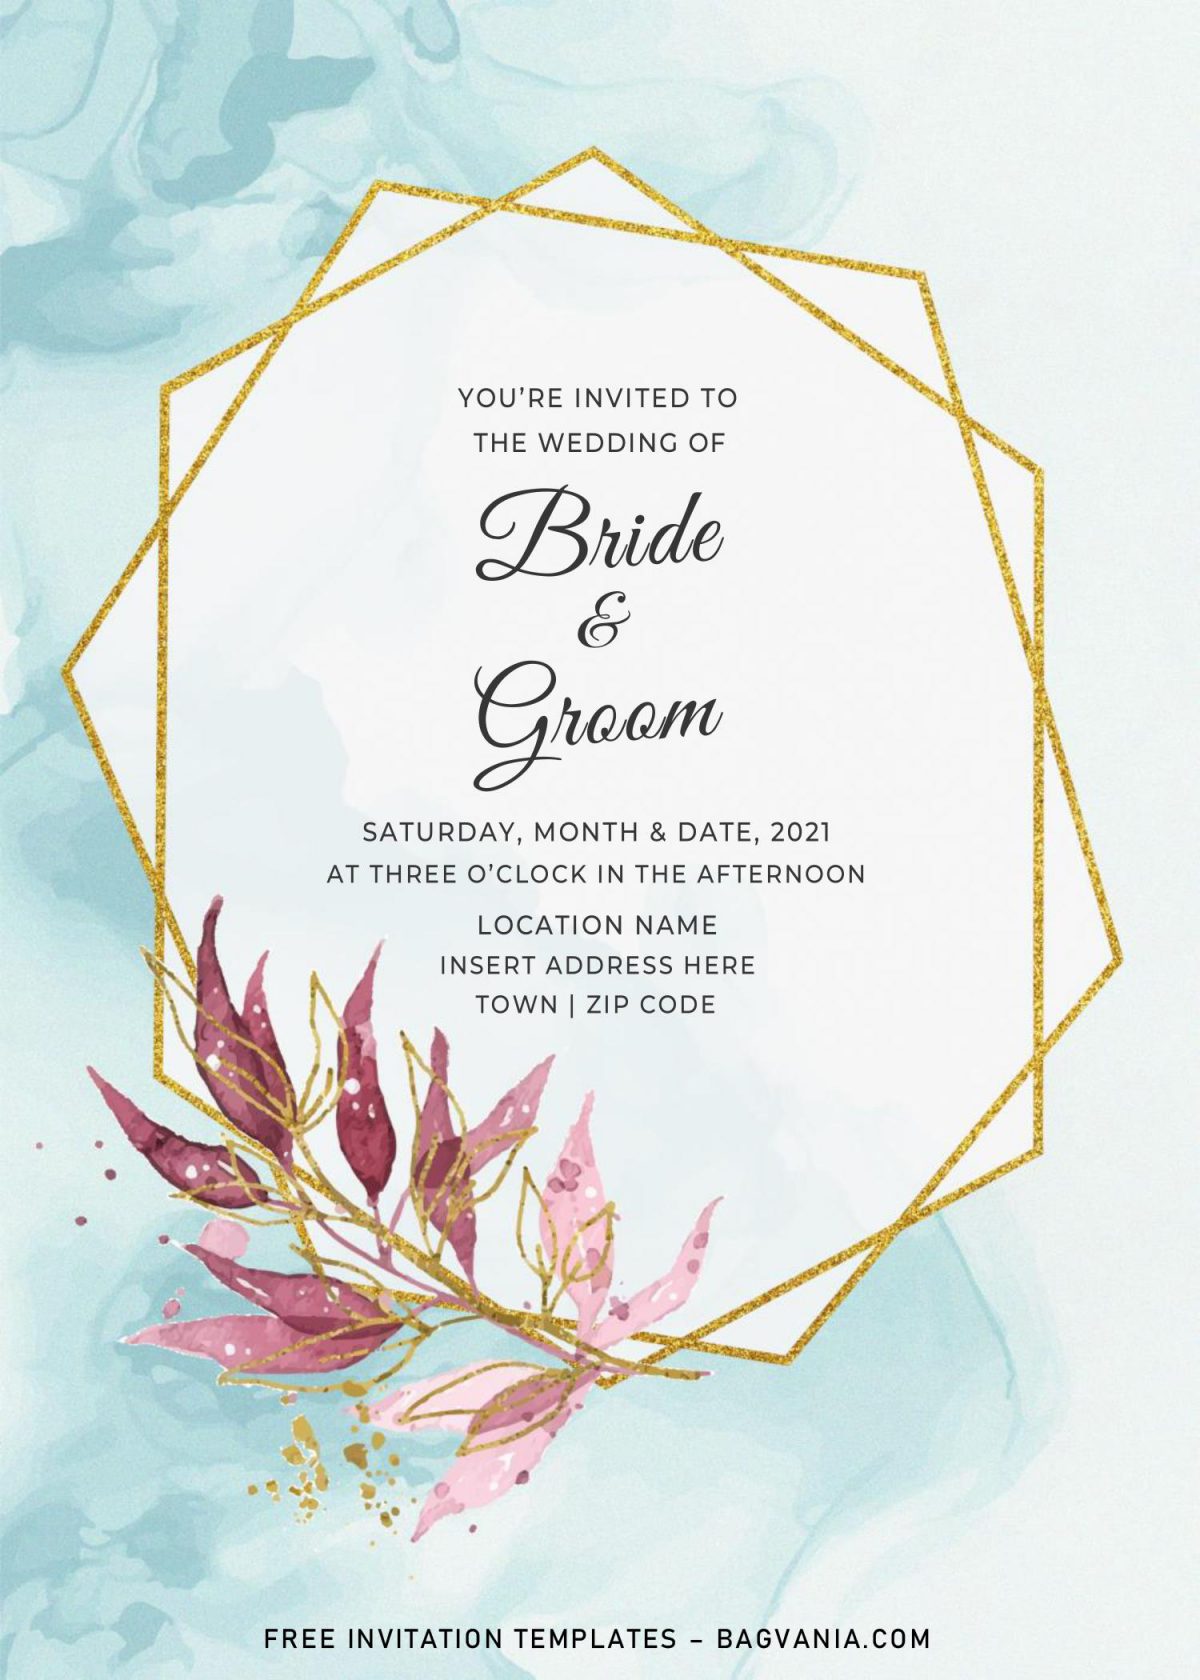 Free Gold Boho Wedding Invitation Templates For Word and has gold glitter geometric frame